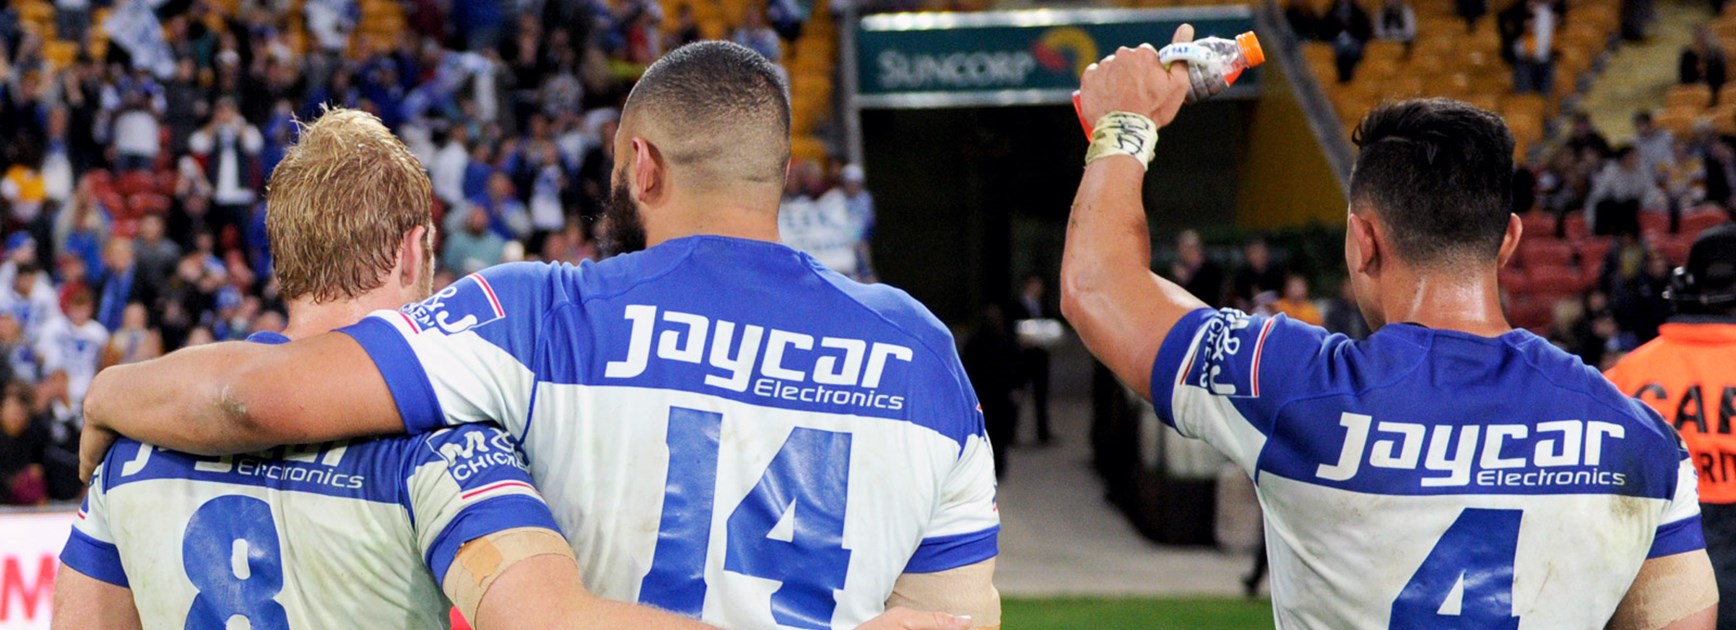 The Bulldogs returned to winning ways against the Broncos in Round 22.